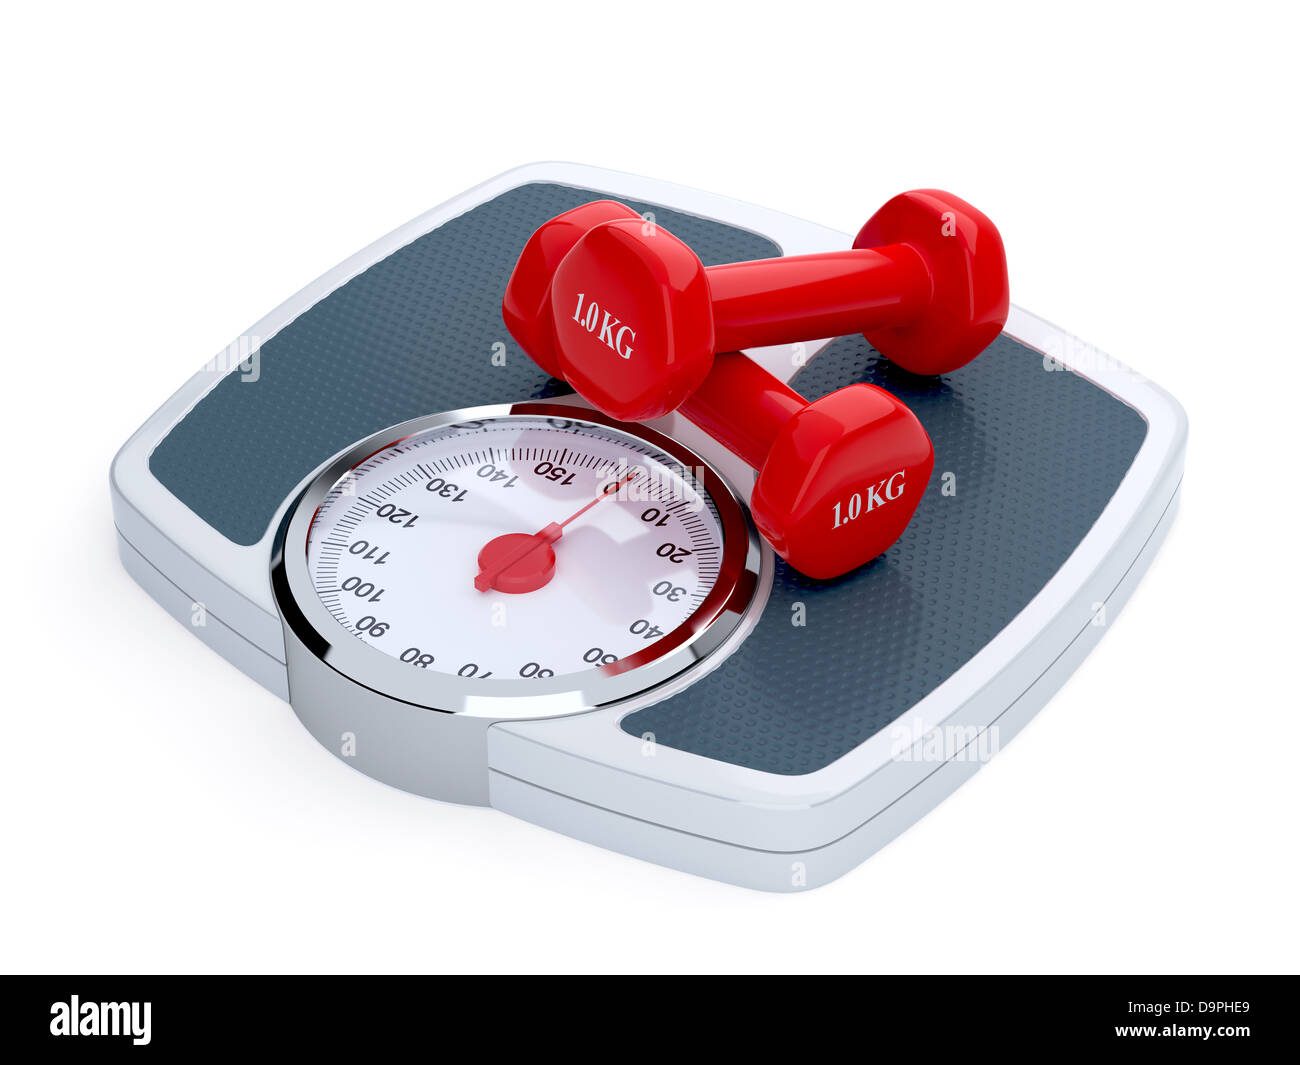 Analog weight scale isolated Stock Photo by ©prapass 9138178